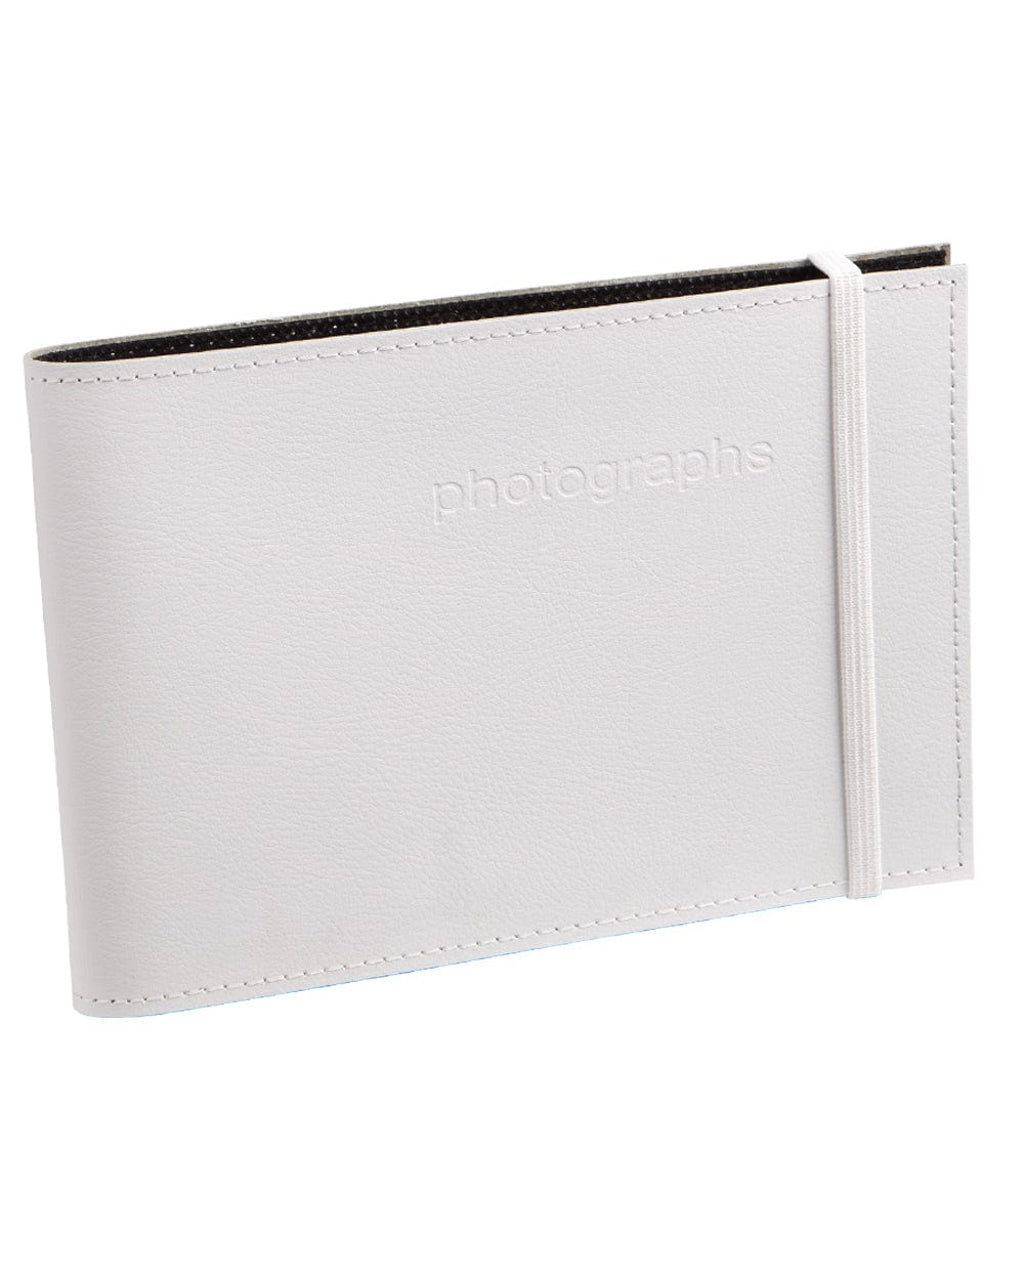 Citi Leather White Slip-in Bragbook Photo Album from our Photo Albums collection by Profile Products Australia